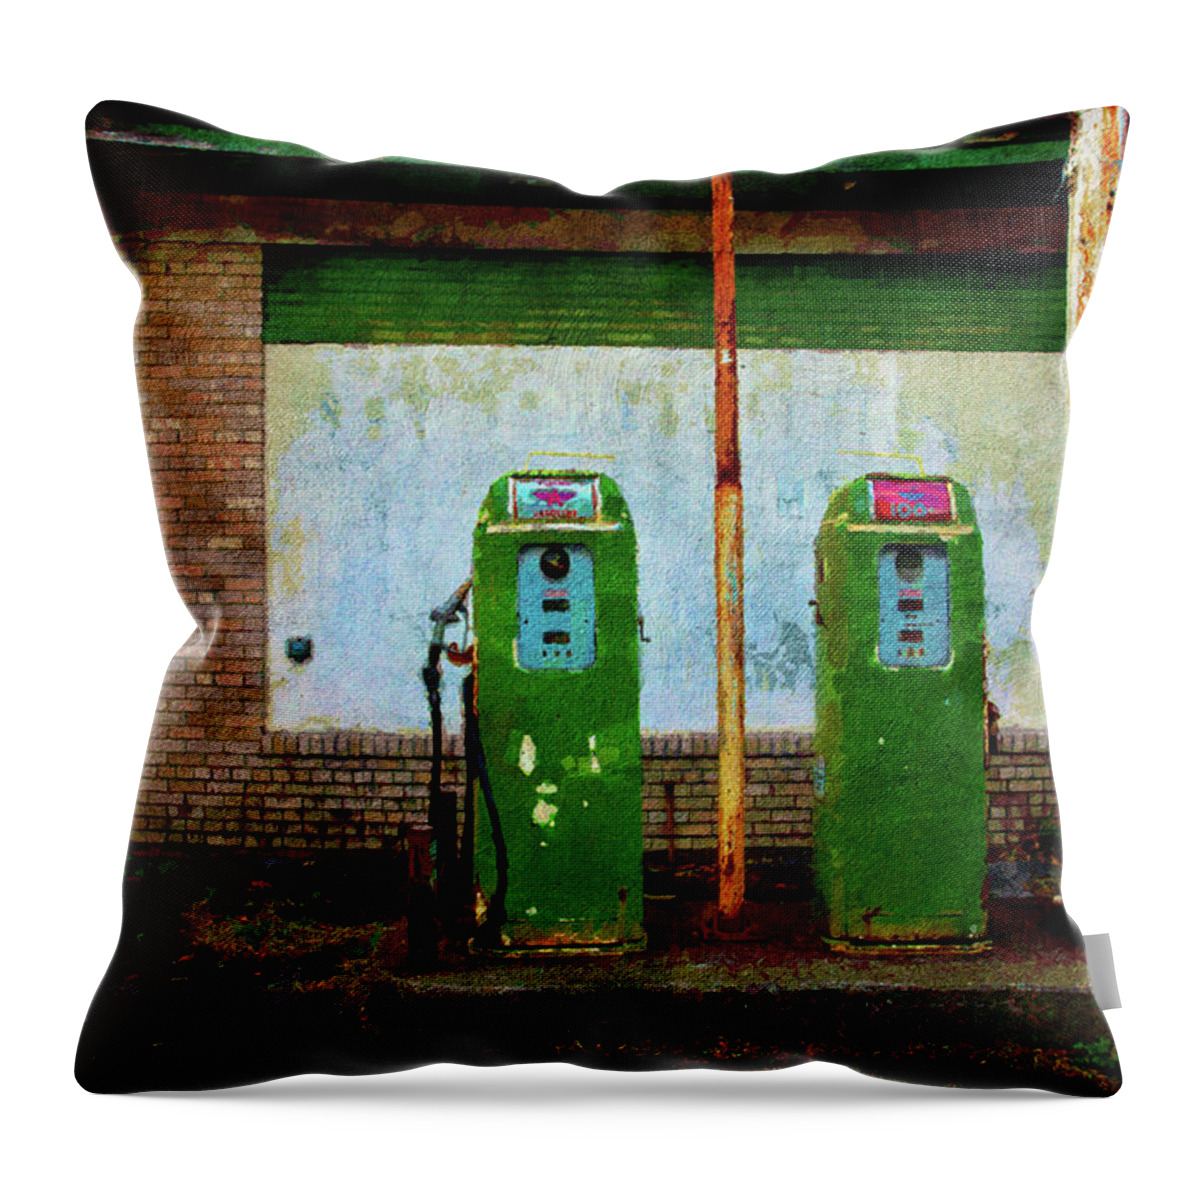 Flying A Gasoline Throw Pillow featuring the photograph Flying A Gas Station by Chris Lord